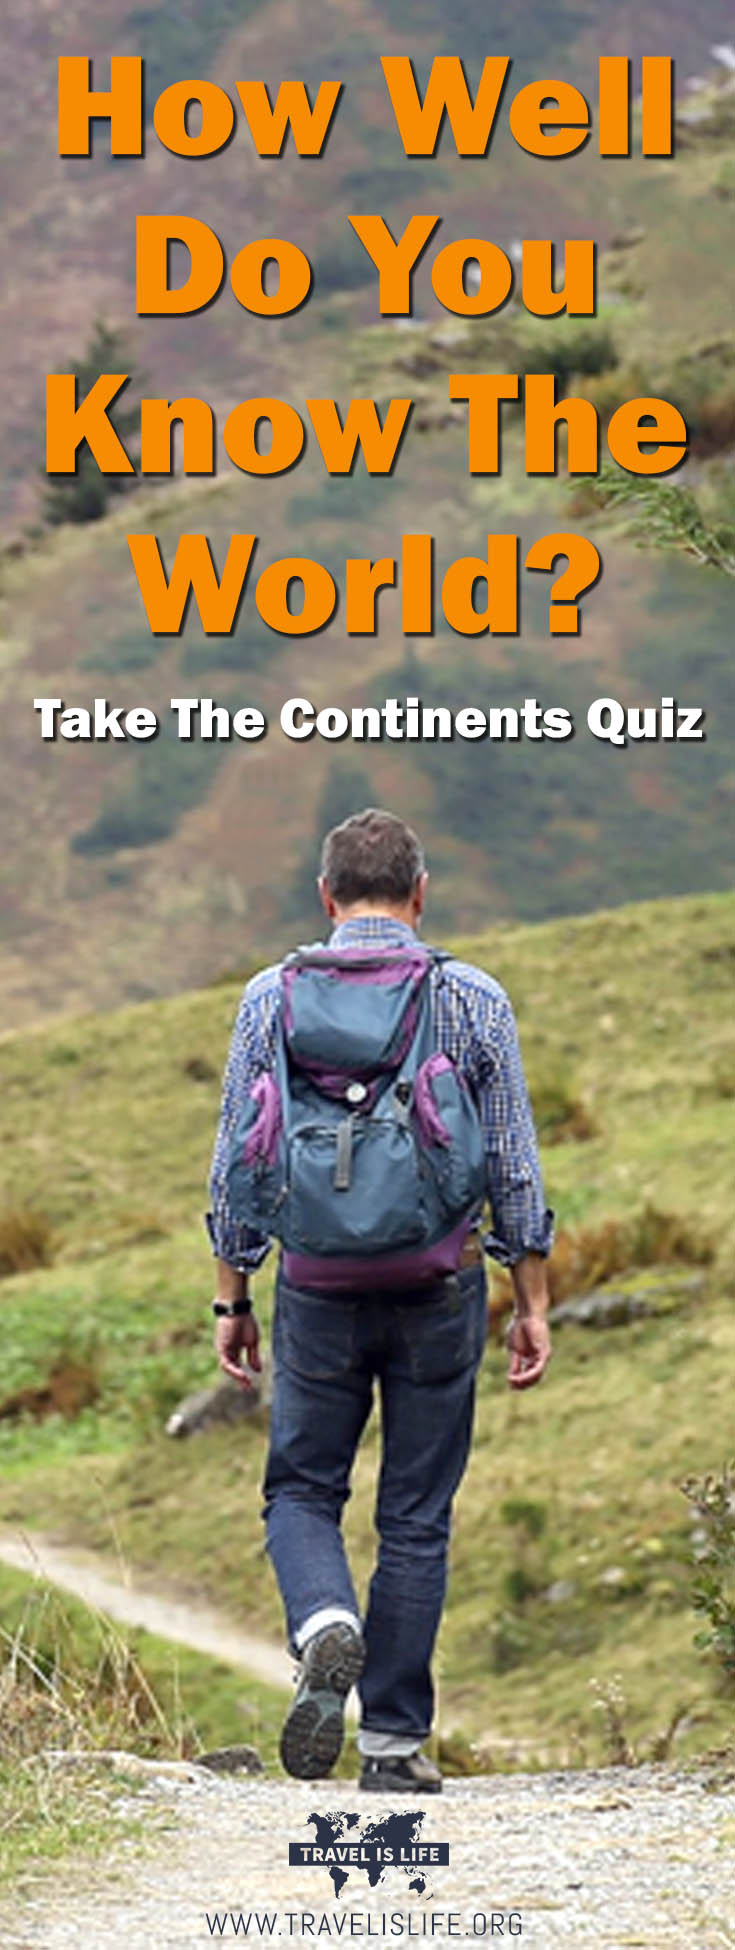 Continents Quiz - How well do you know the world?